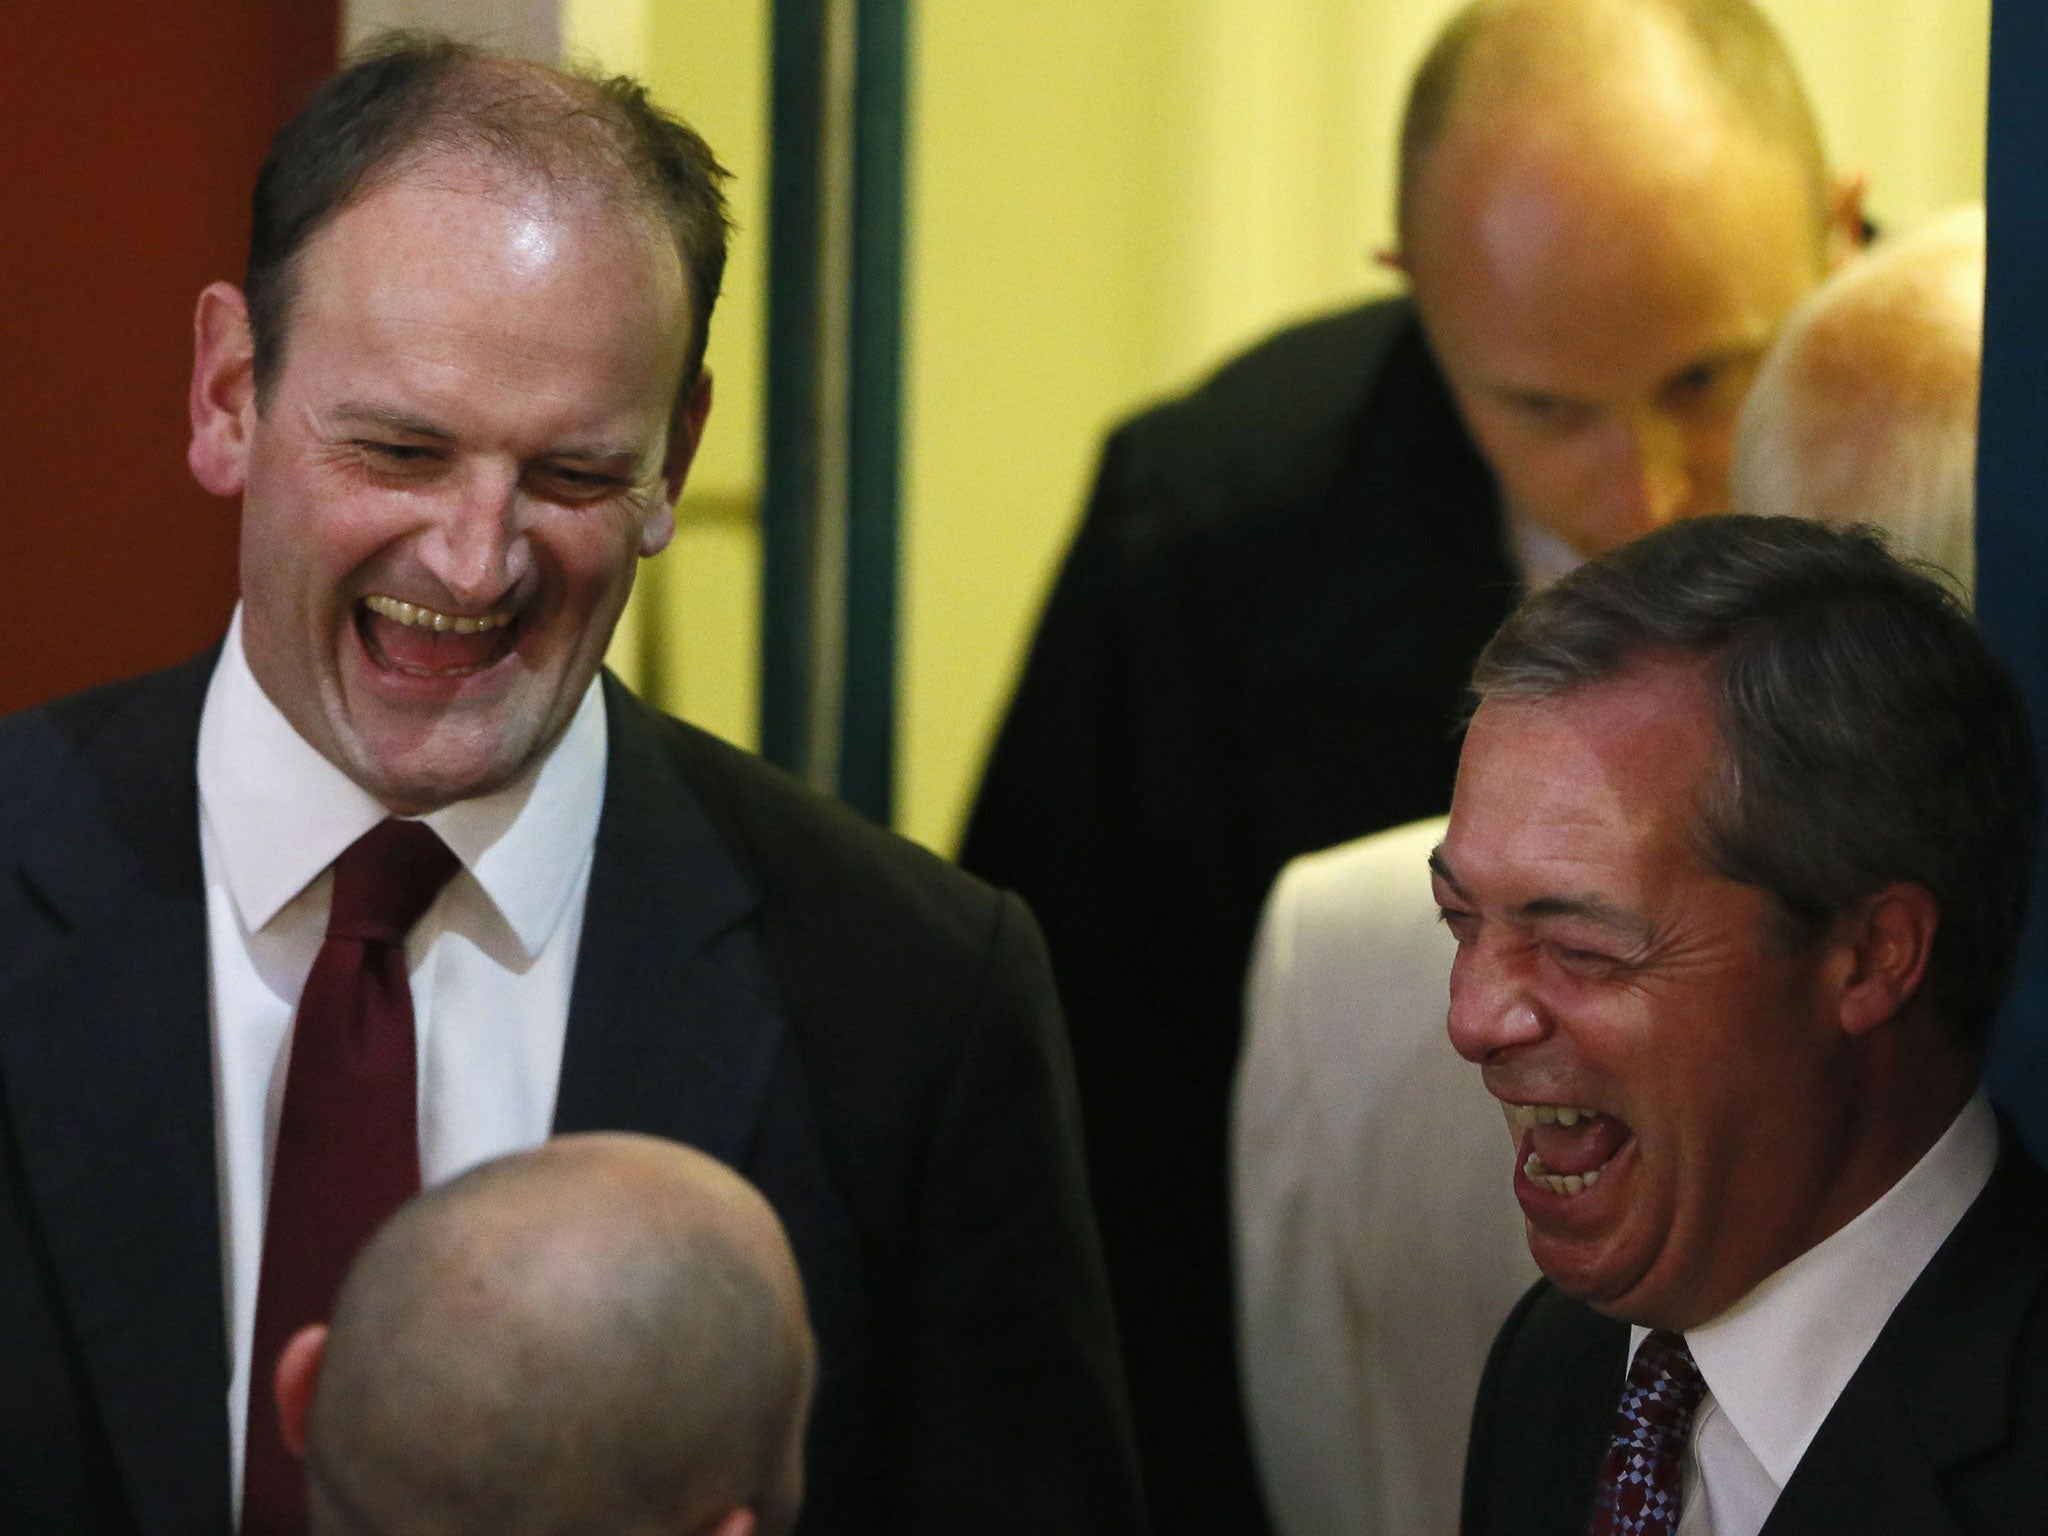 Douglas Carswell (left) and Ukip leader Nigel Farage celebrate their win in Clacton